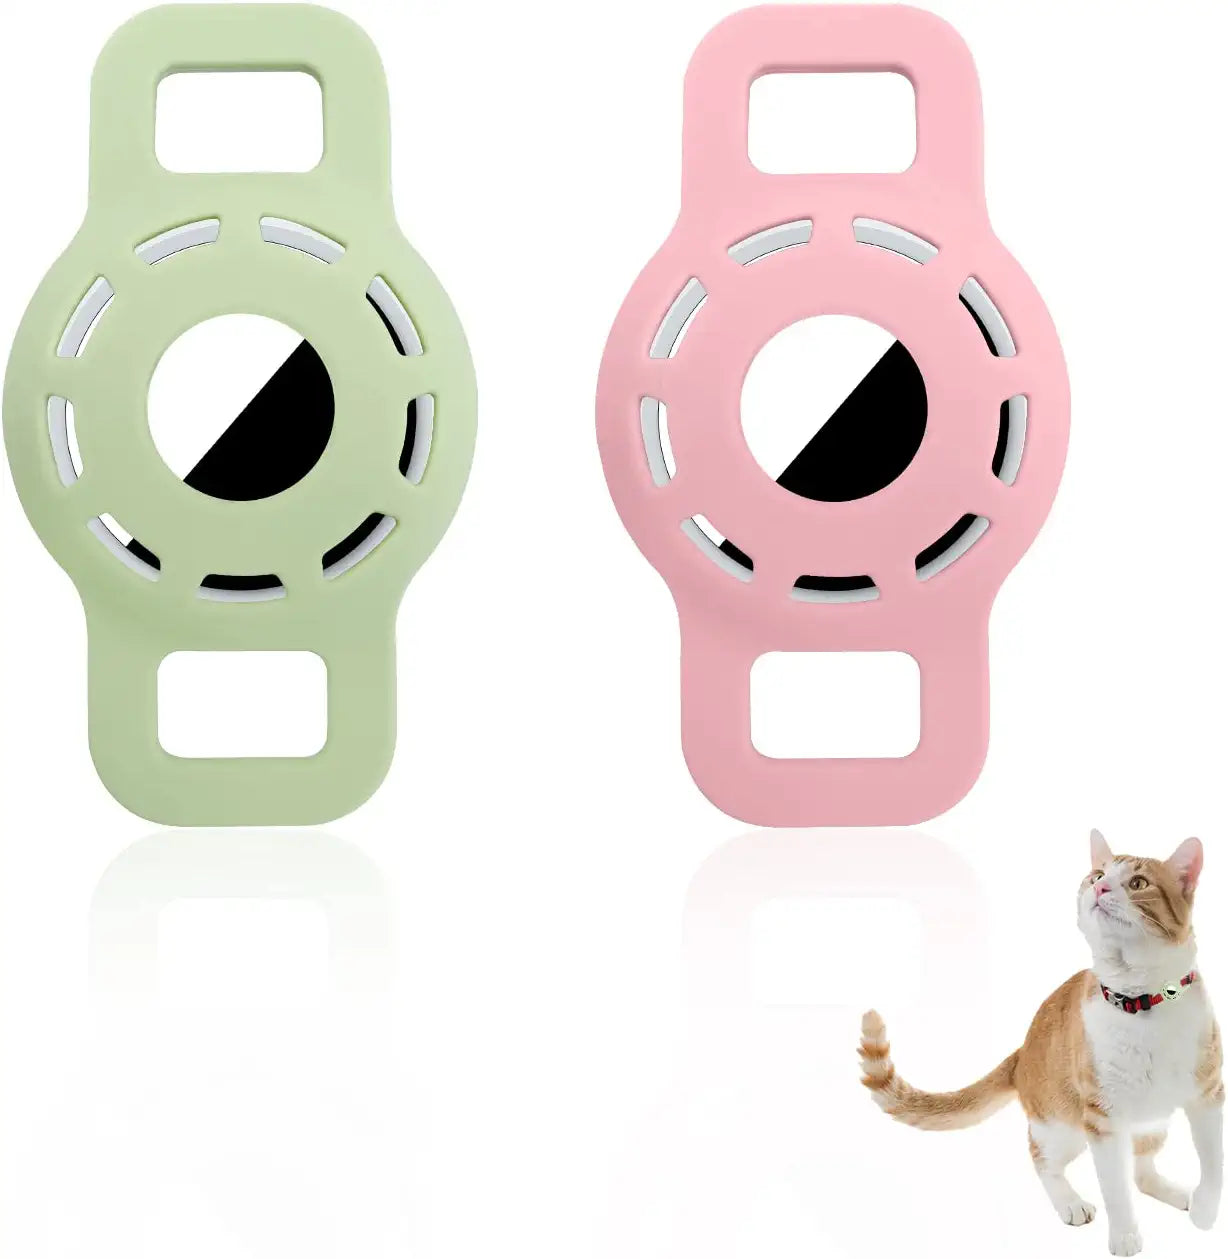 Funincrea 2 Pcs Airtag Case for Dog Collar, Anti-Scratch Silicone Airtag Dog Collar Holder GPS Tracker Case Compatible with Apple, Airtag Protective Case for Pet Collar (Luminous Green/Luminous Pink)